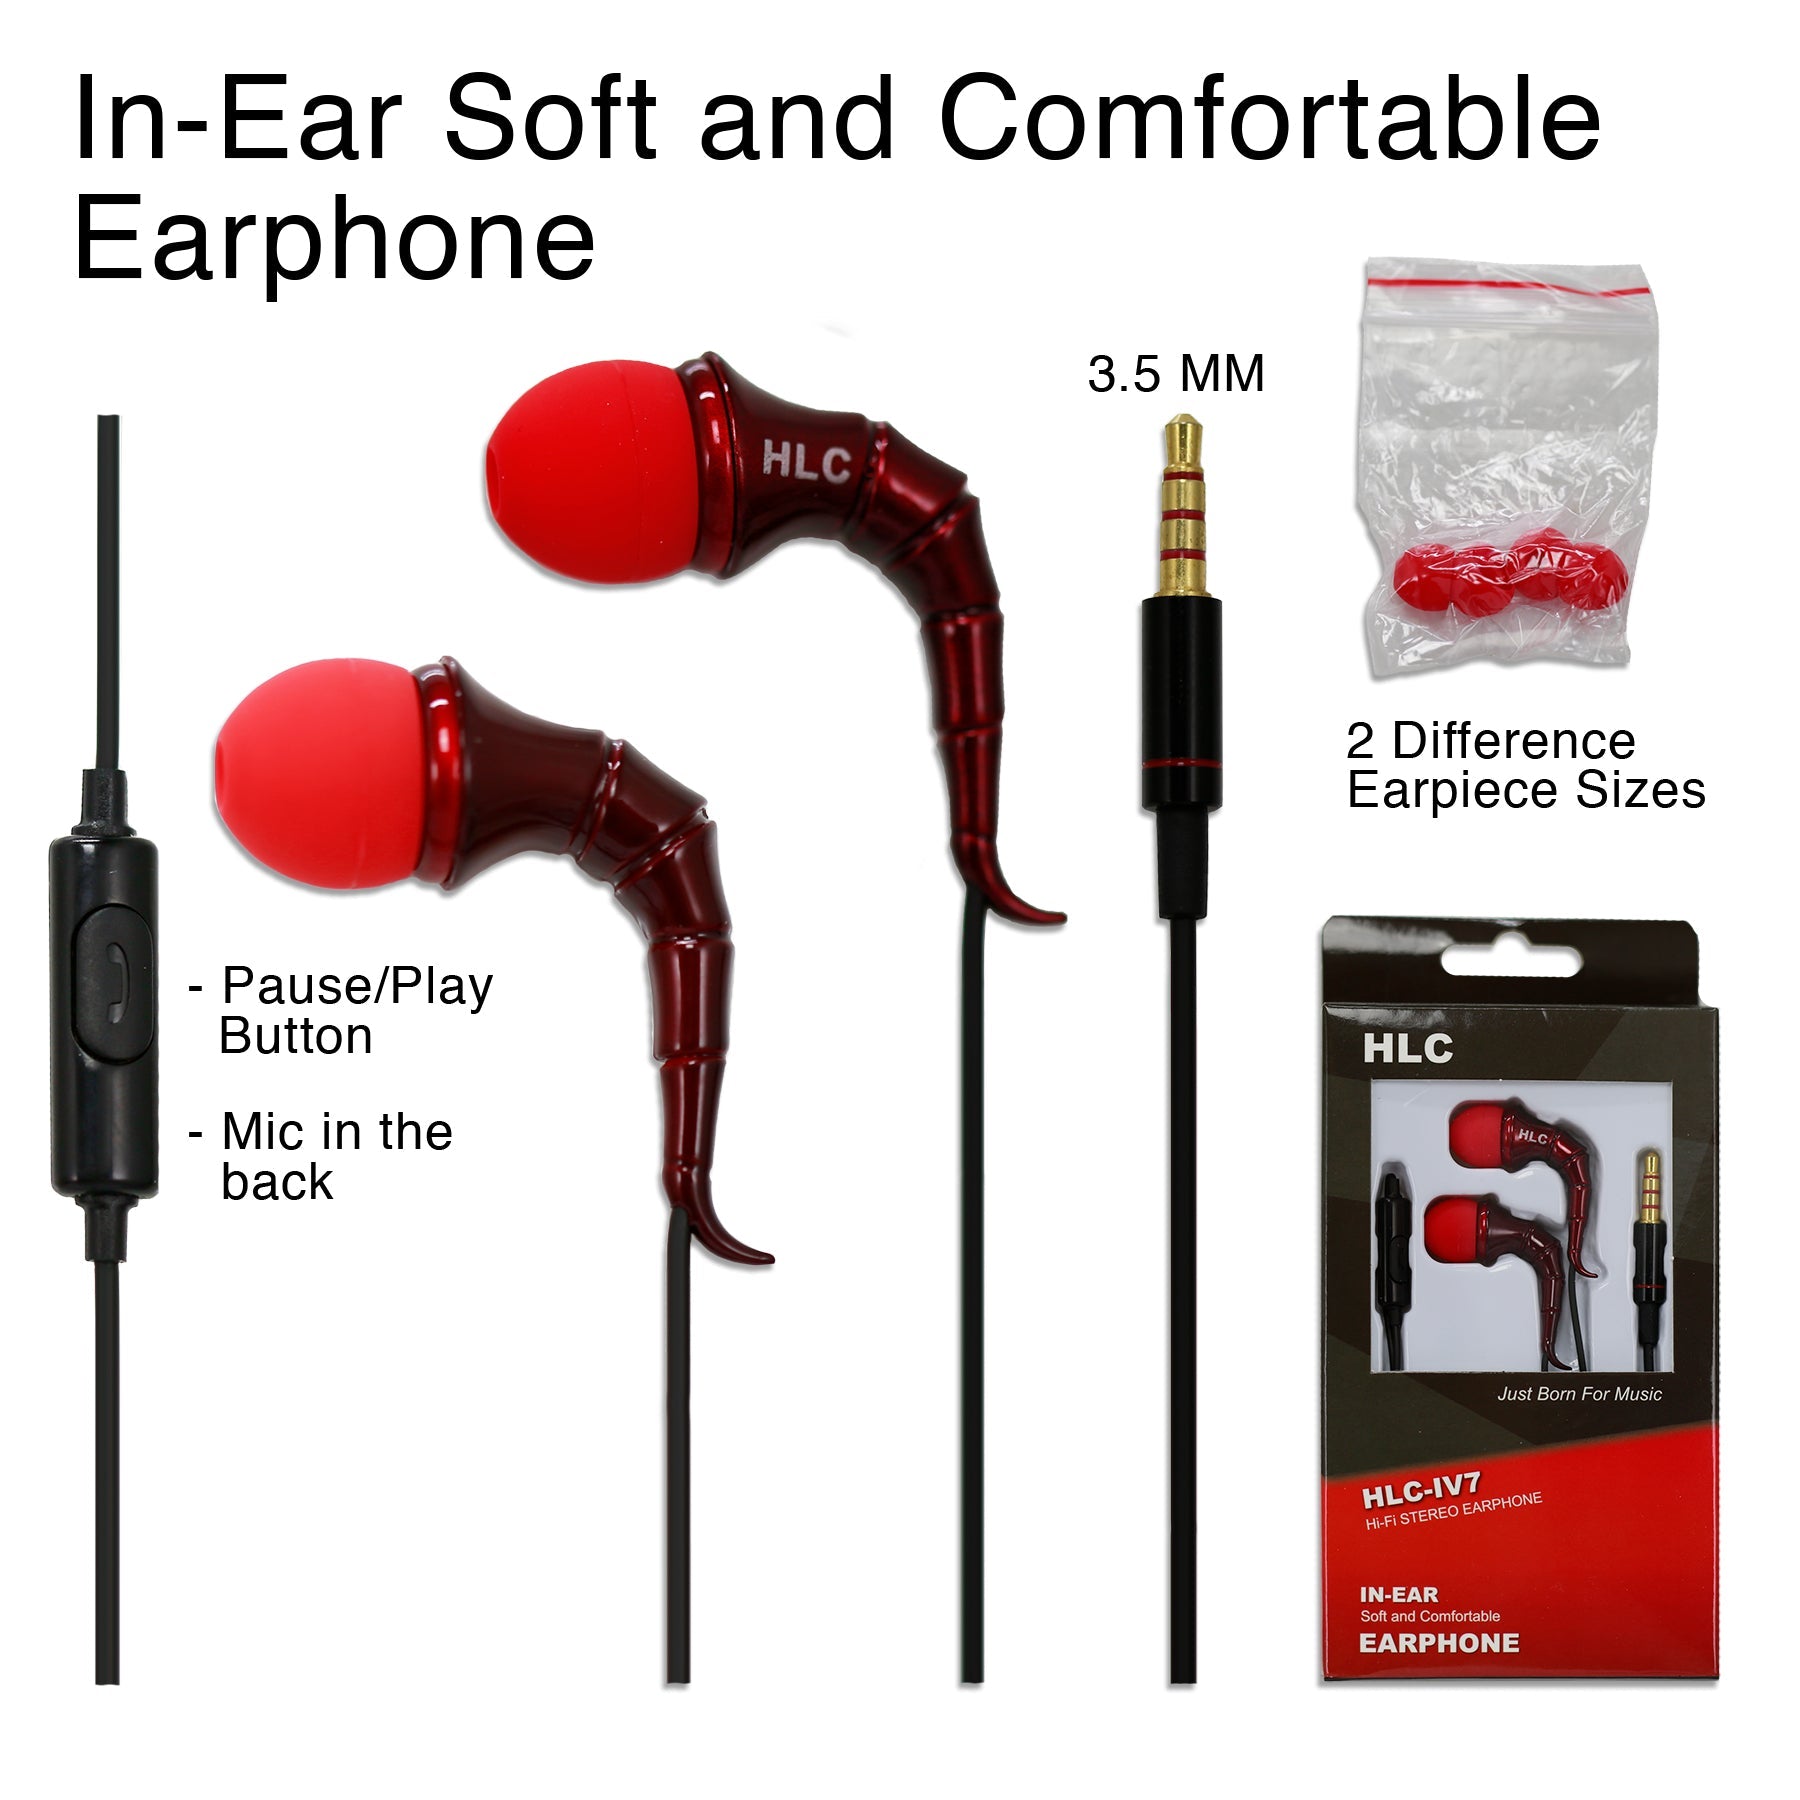 Universal Hi-fi Stereo Earphone with Noise Isolation - Red